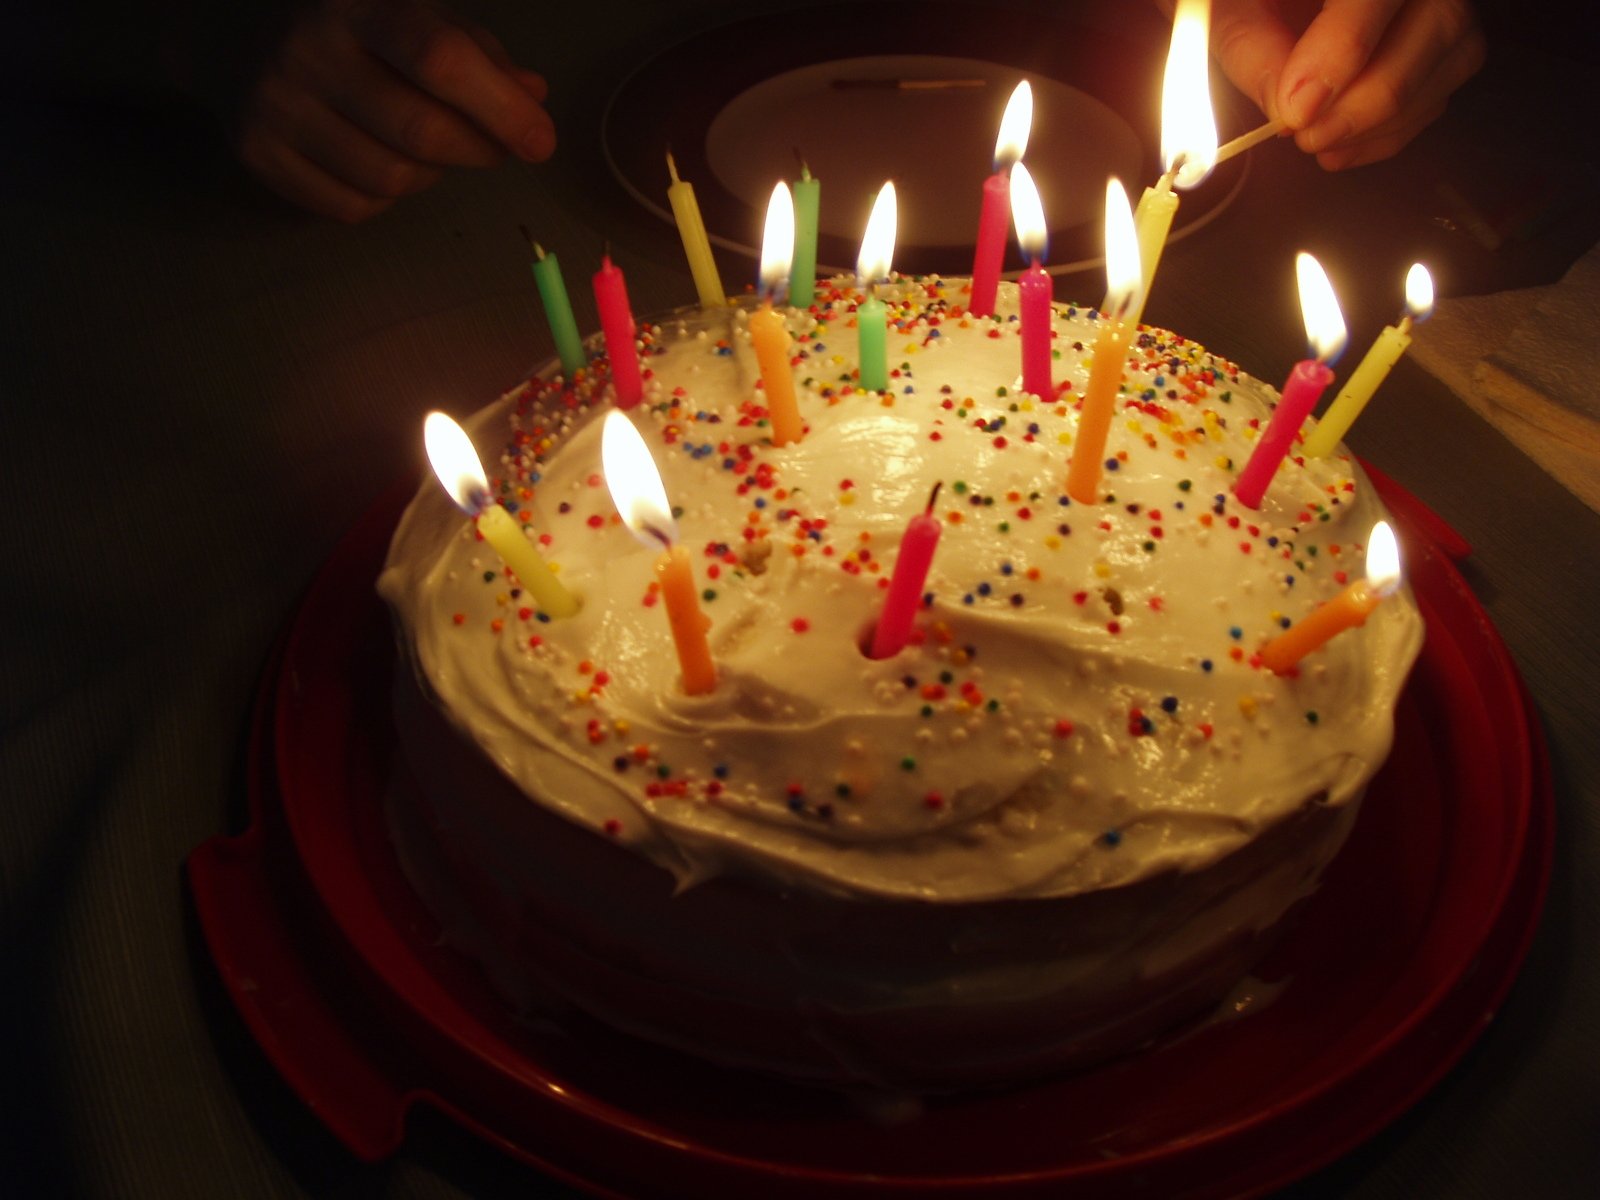 someone lighting candles on a birthday cake with white icing